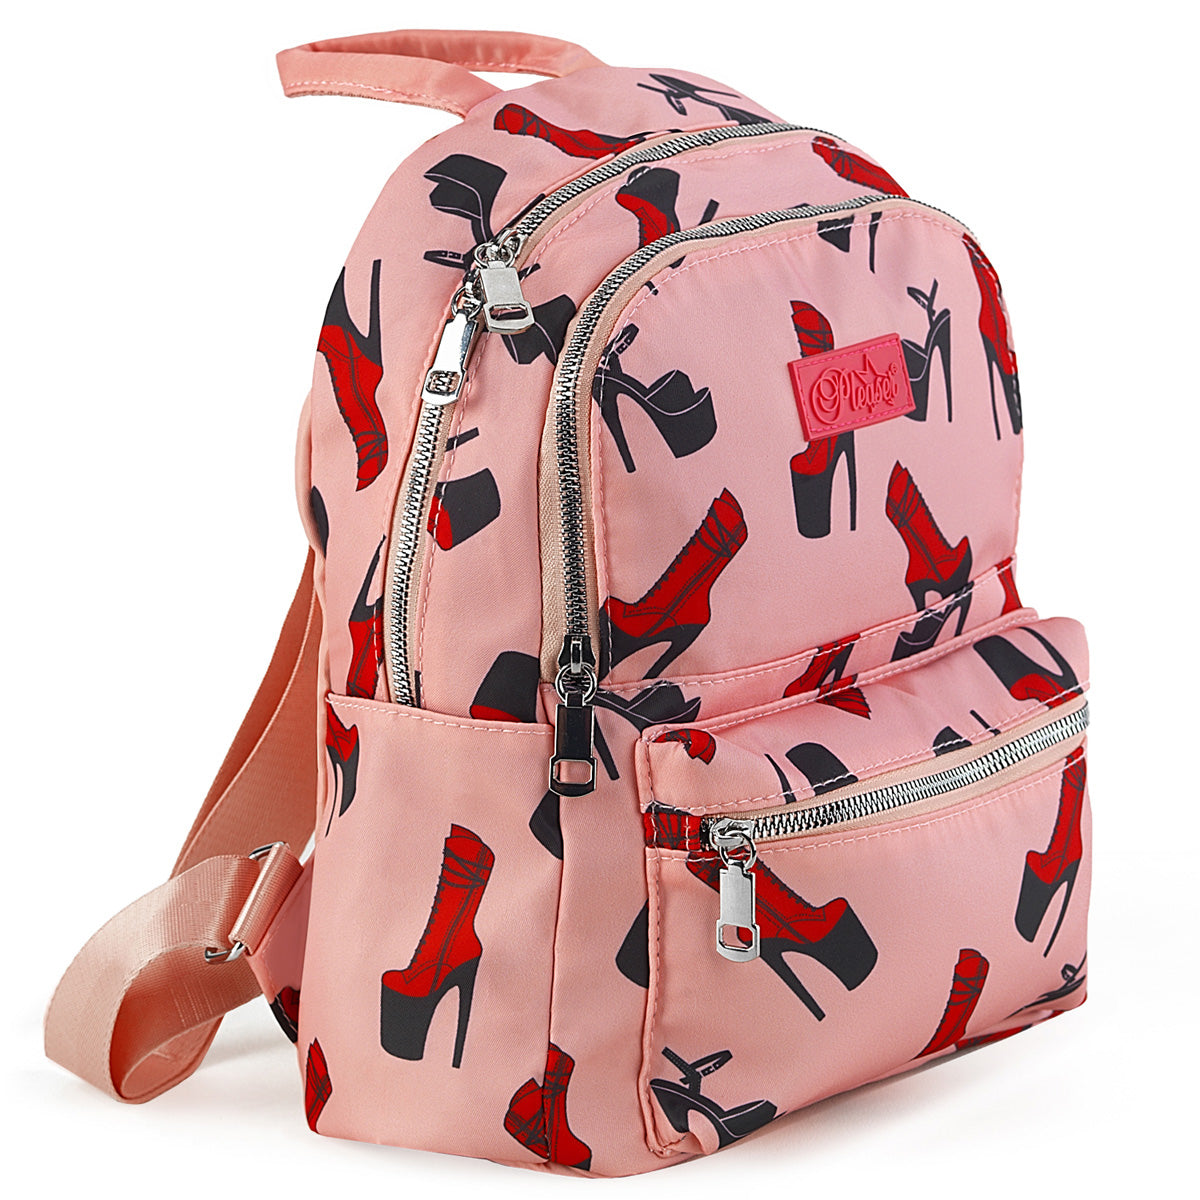 HB-501-1 - Baby Pink Nylon Pleaser Backpack